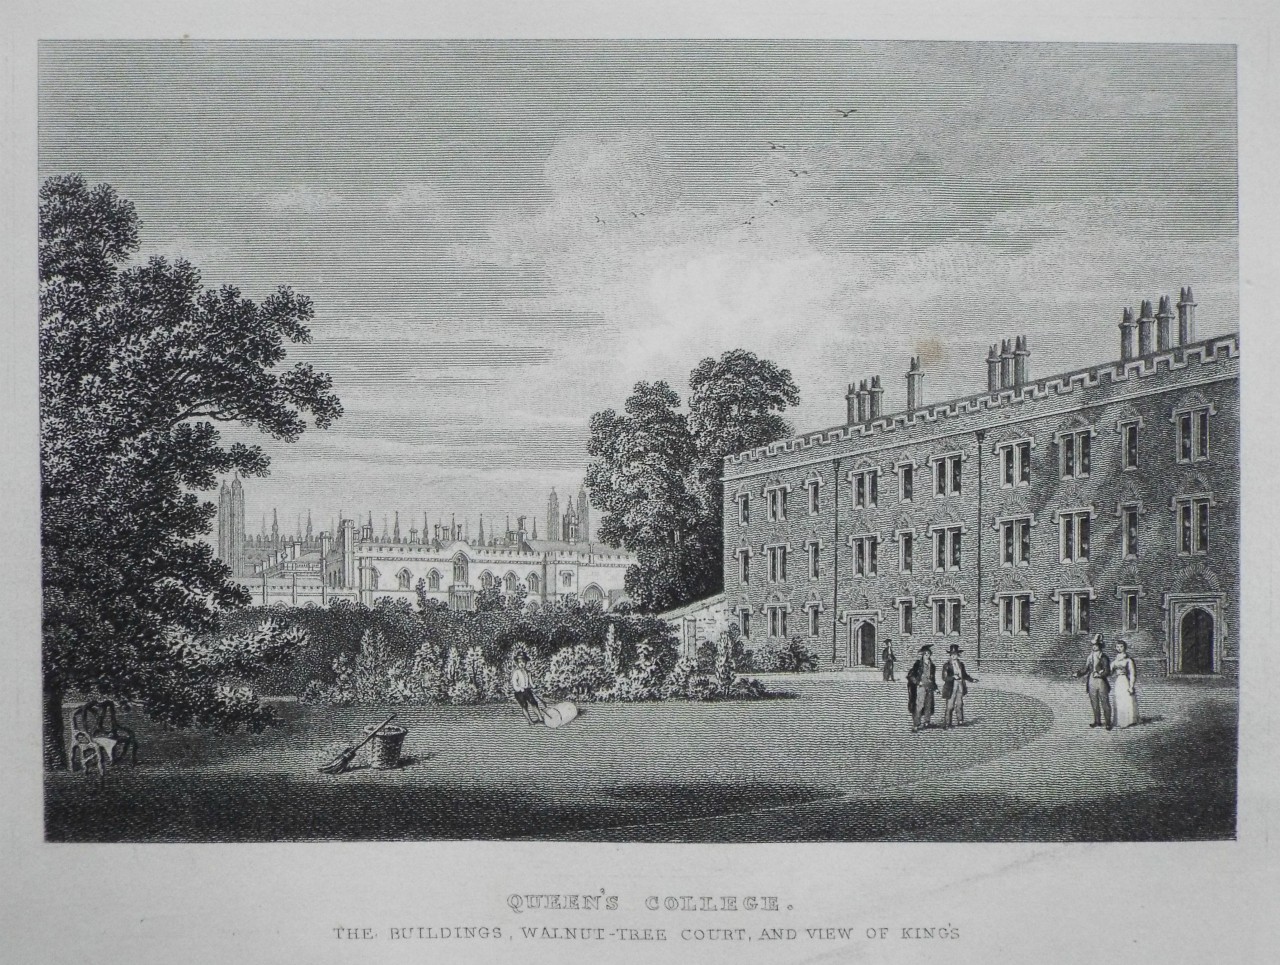 Print - Queen's College. The Buildings, Walnut-Tree Court, and View of King's.